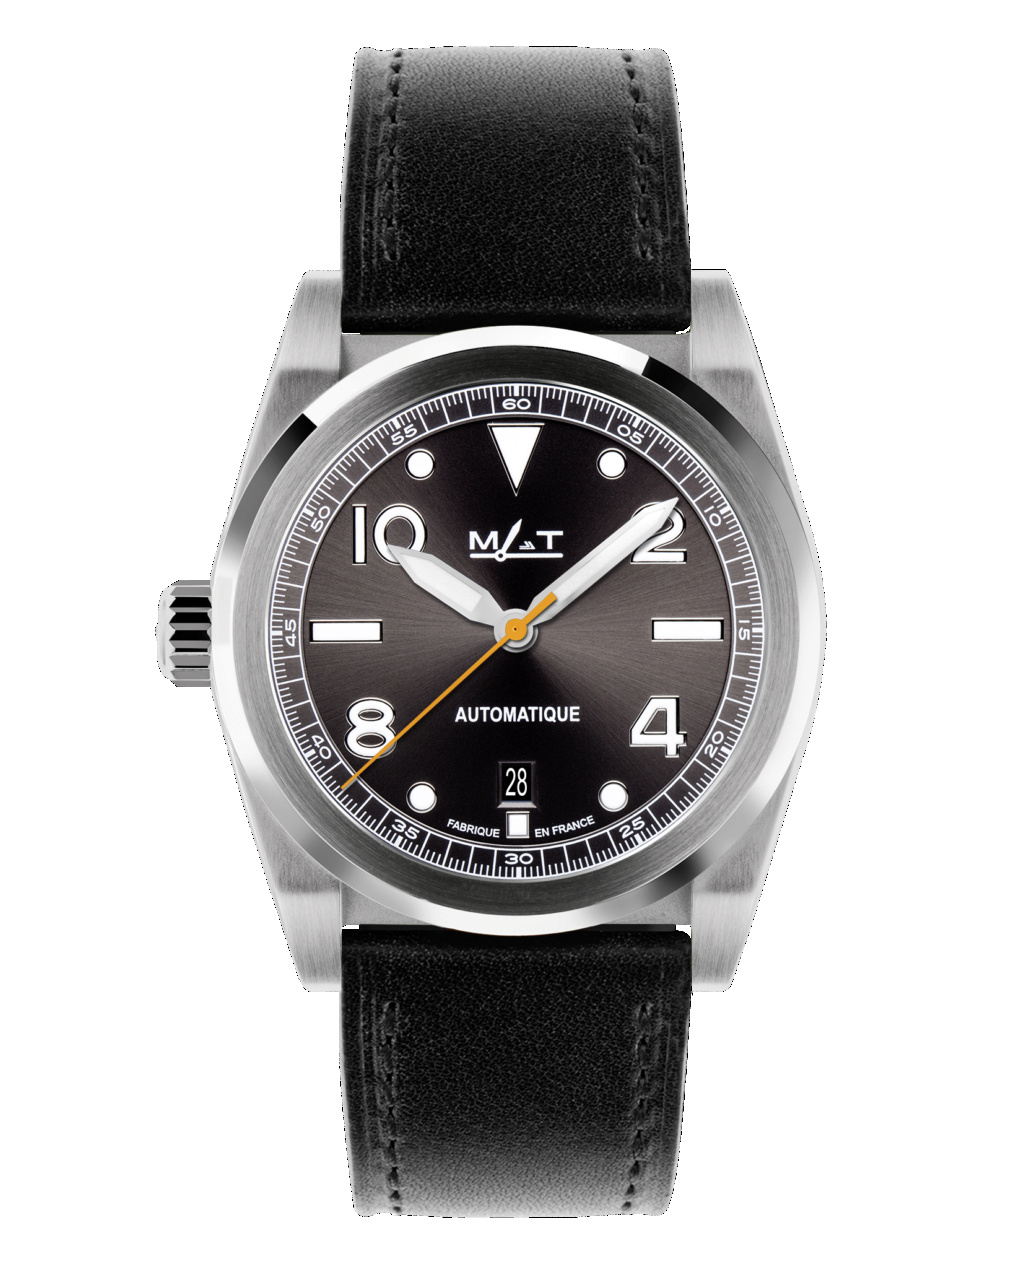 Montres MATWATCHES - Mer Air Terre - Page 43 E6989c10